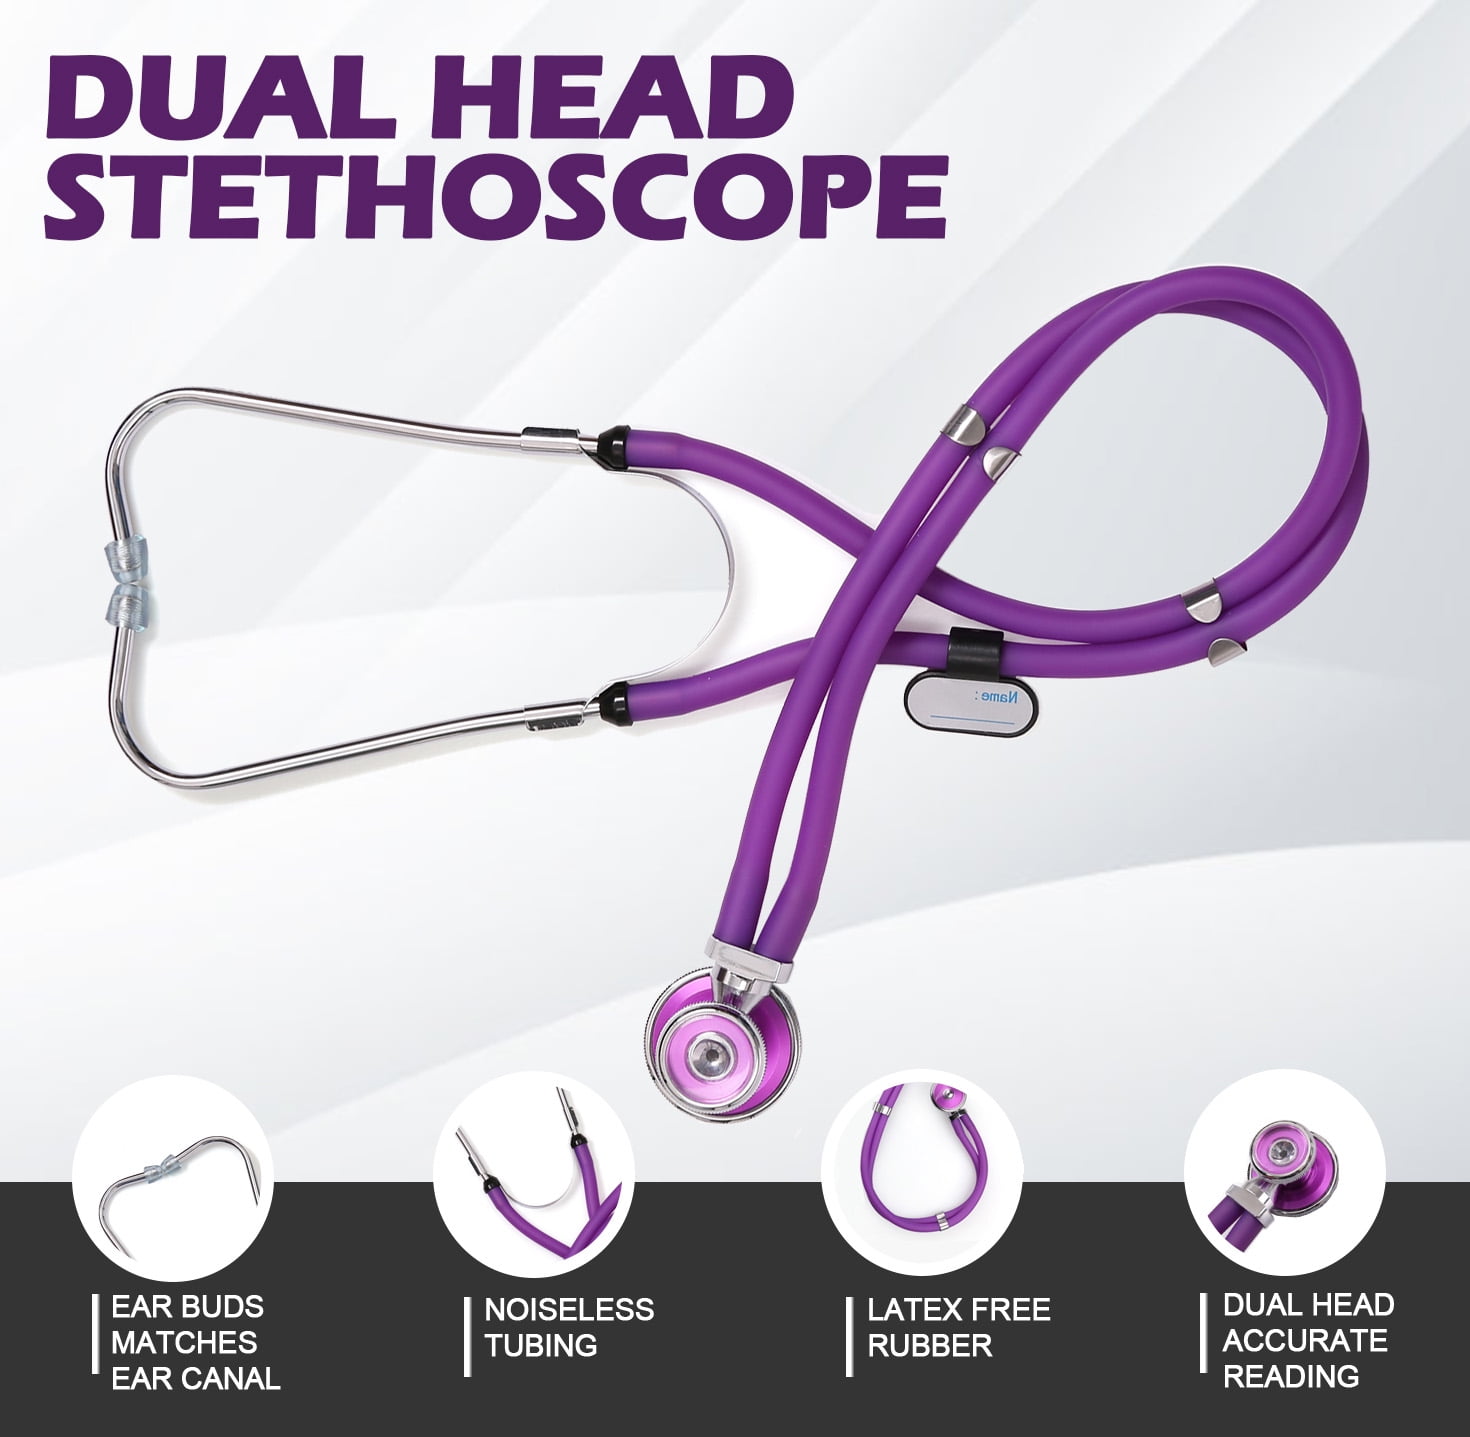 Dual-Head Stethoscope by Omron Healthcare